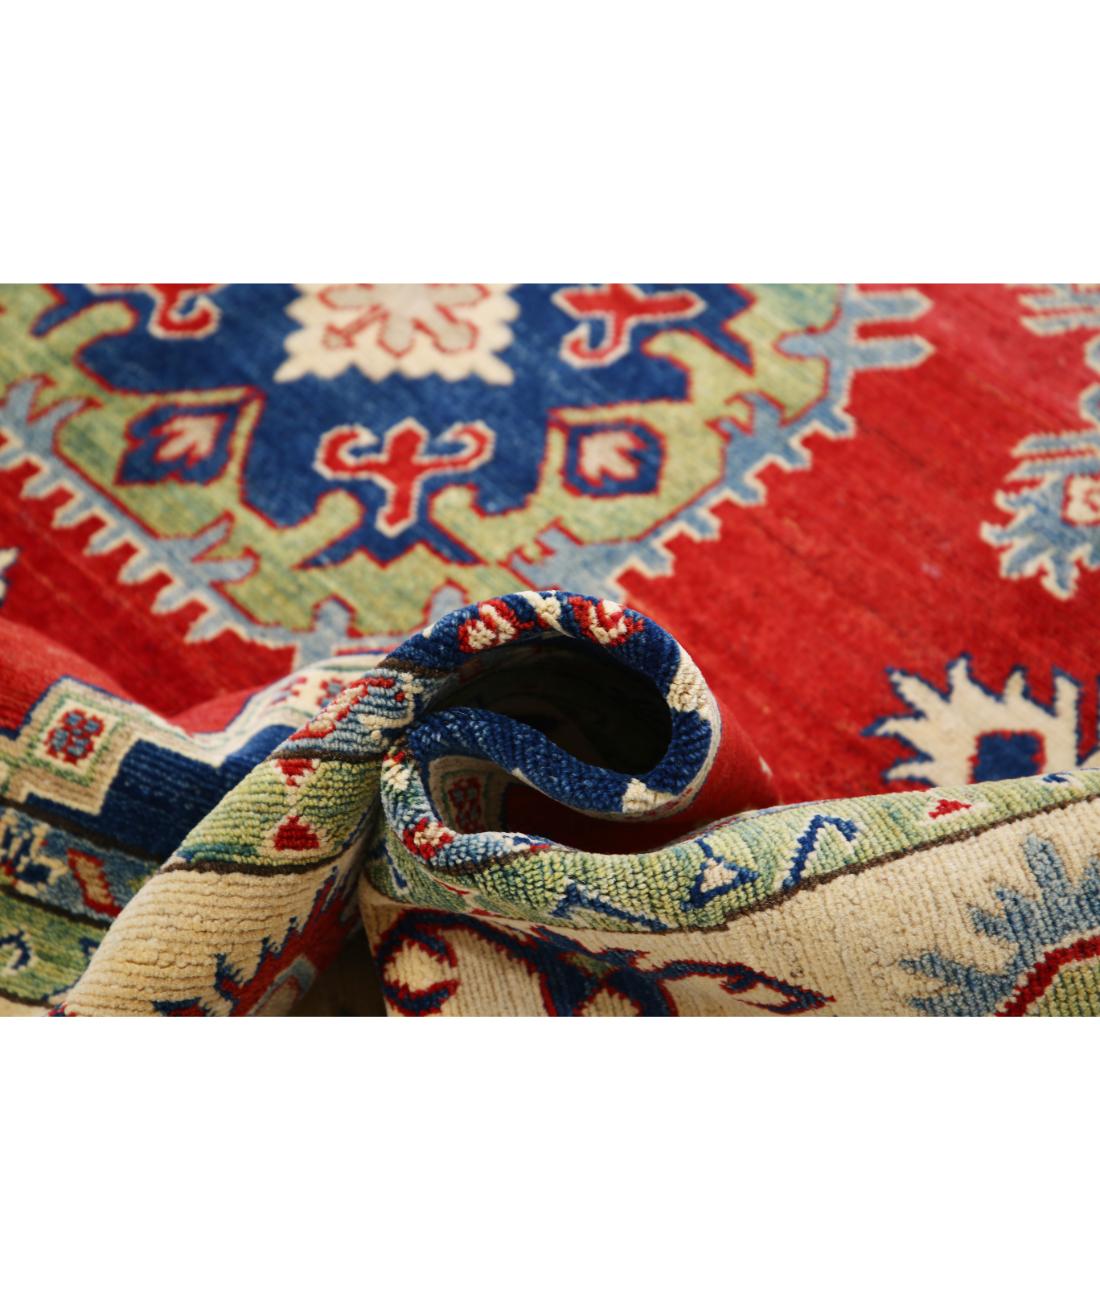 Hand Knotted Tribal Kazak Wool Rug - 8'6'' x 12'4'' 8' 6" X 12' 4" (259 X 376) / Red / Ivory